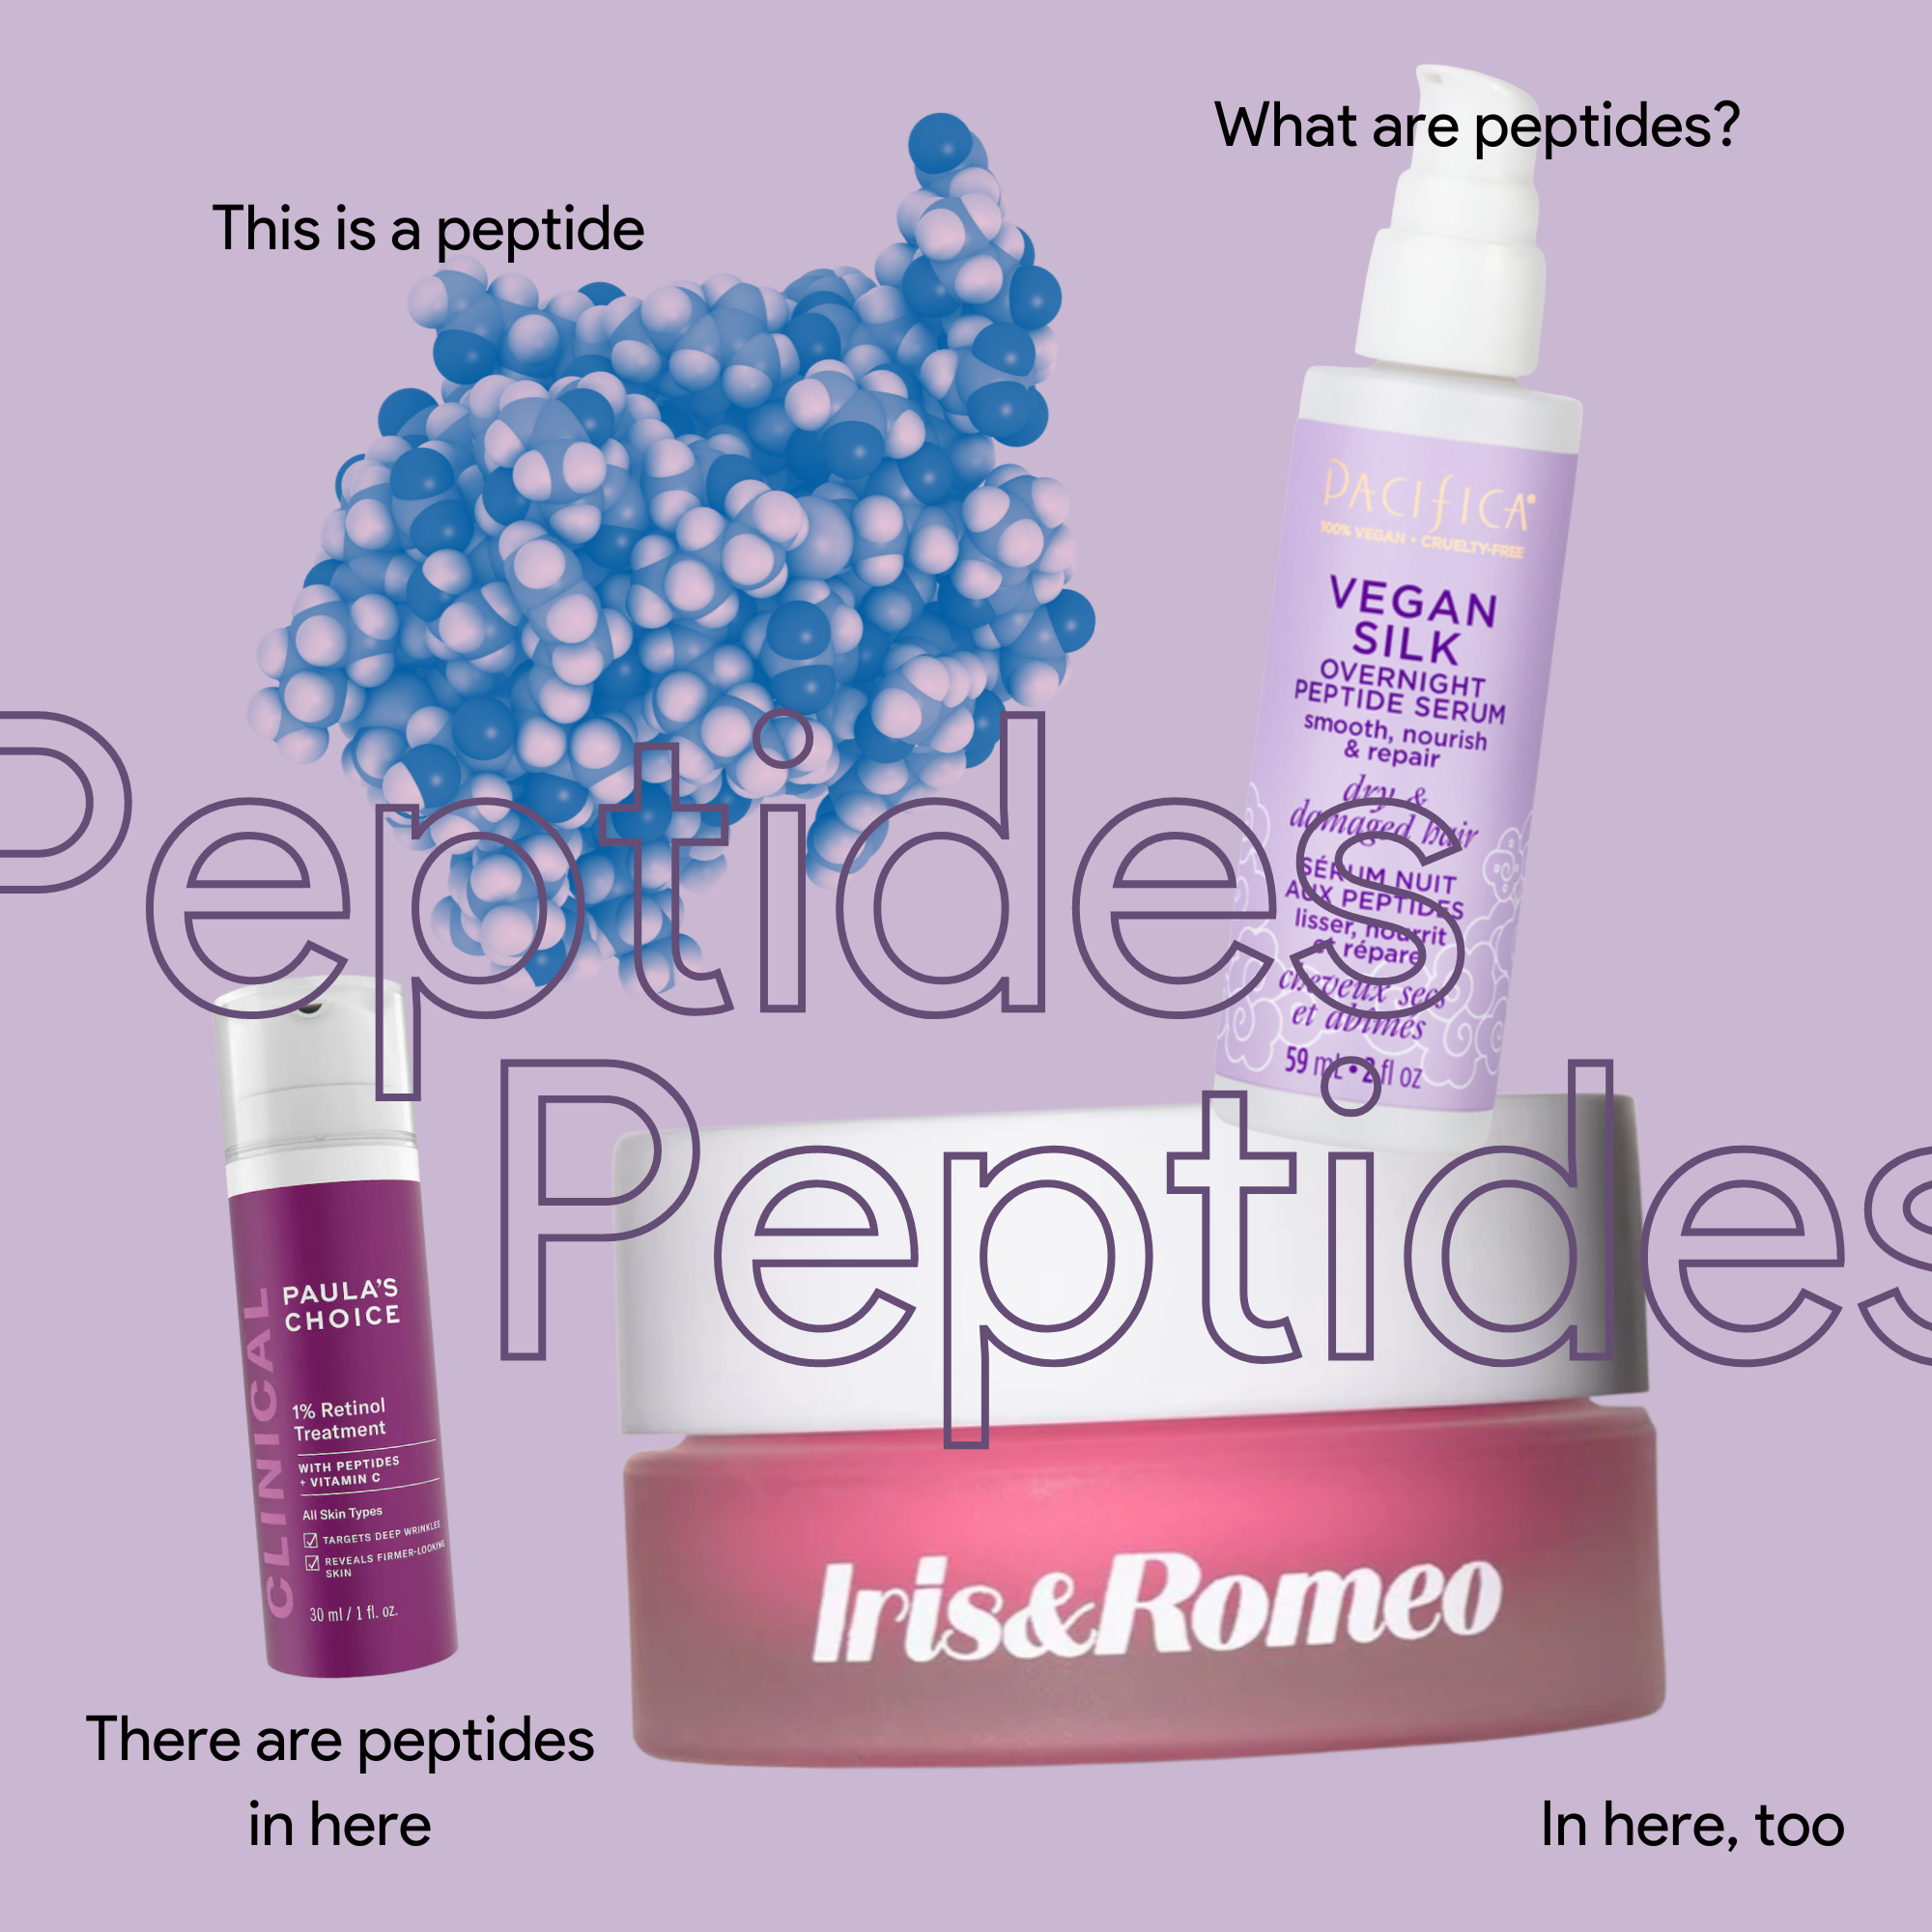 What are these peptides doing in my skincare?